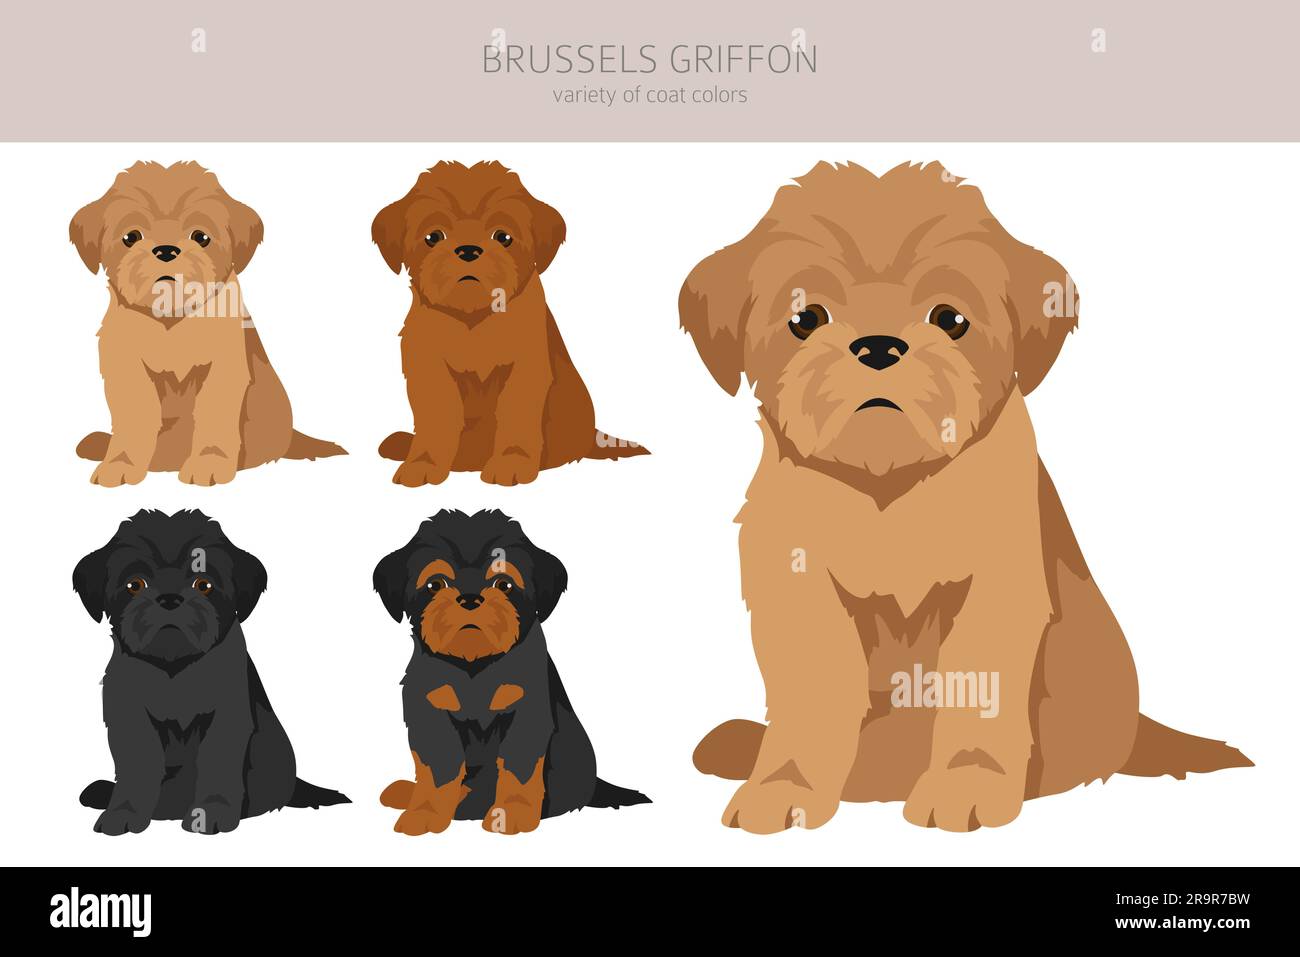 Brussels griffon puppies clipart. Different coat colors and poses set.  Vector illustration Stock Vector